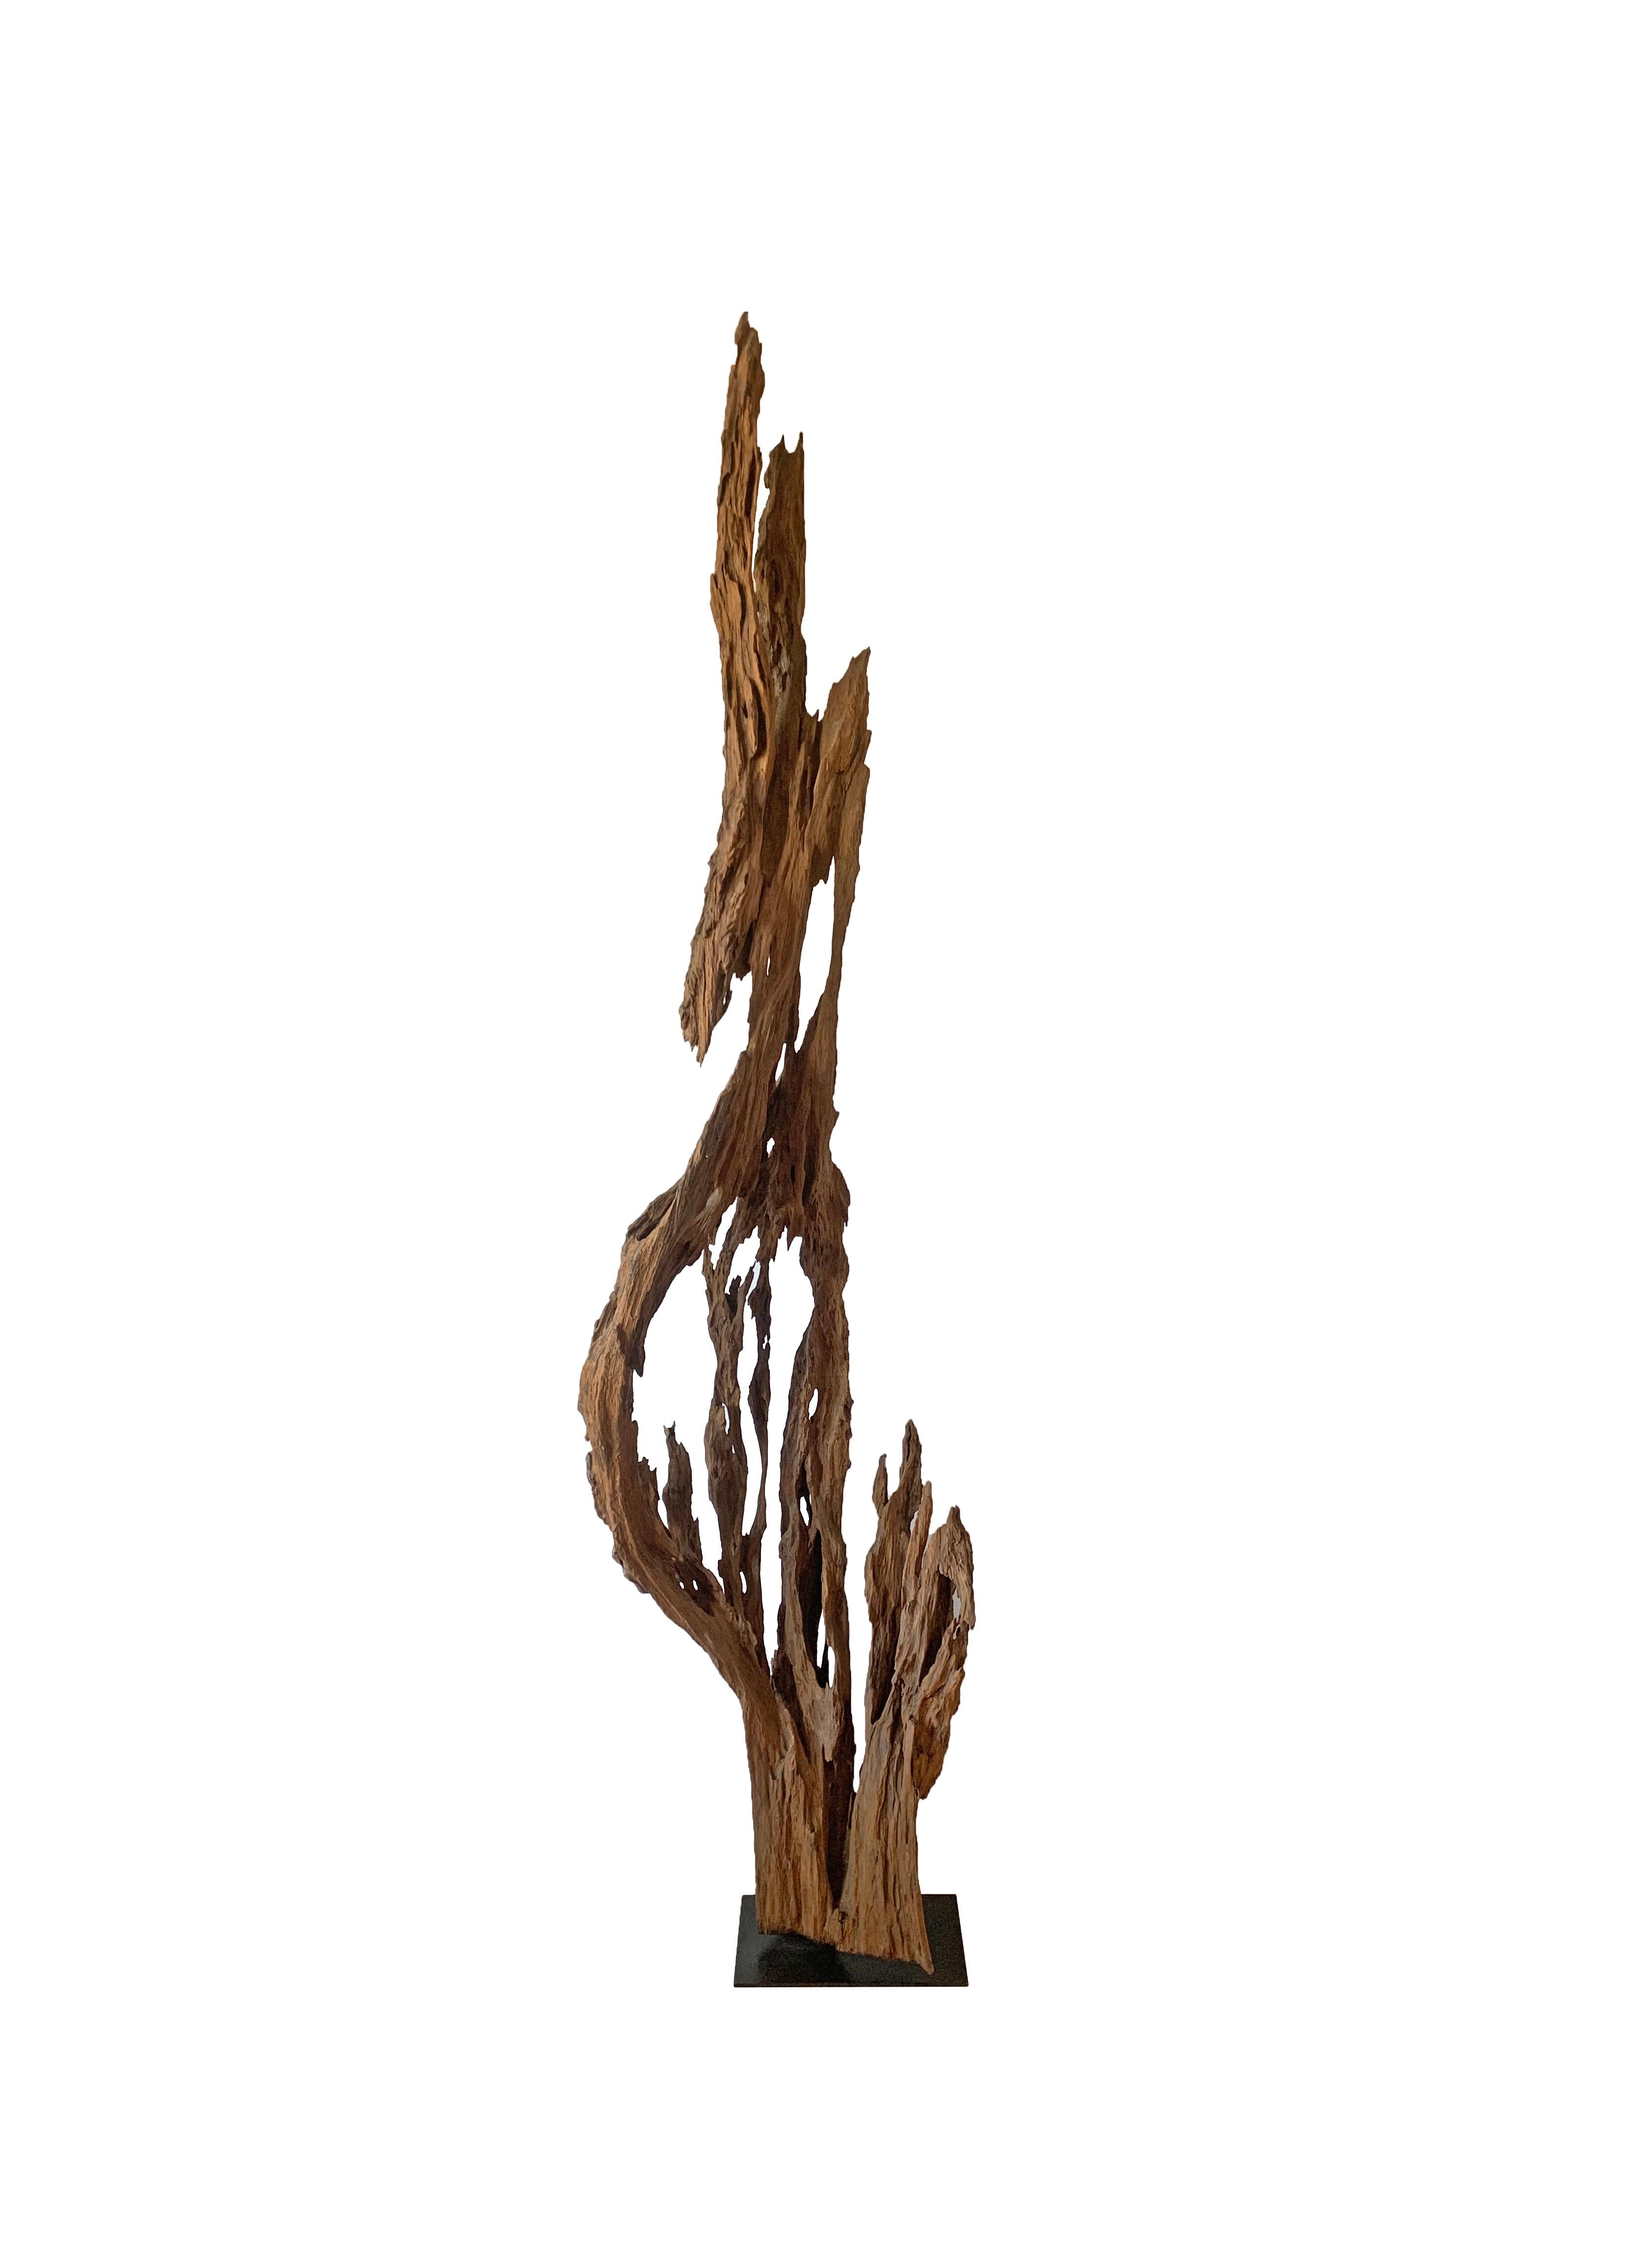 This section of eroded teak trunk from the dense jungle of Sumatra will be sure to invoke conversation in any space, a striking naturally formed sculpture. Despite being largely eroded it still remains sturdy and robust. Supported by a metal stand